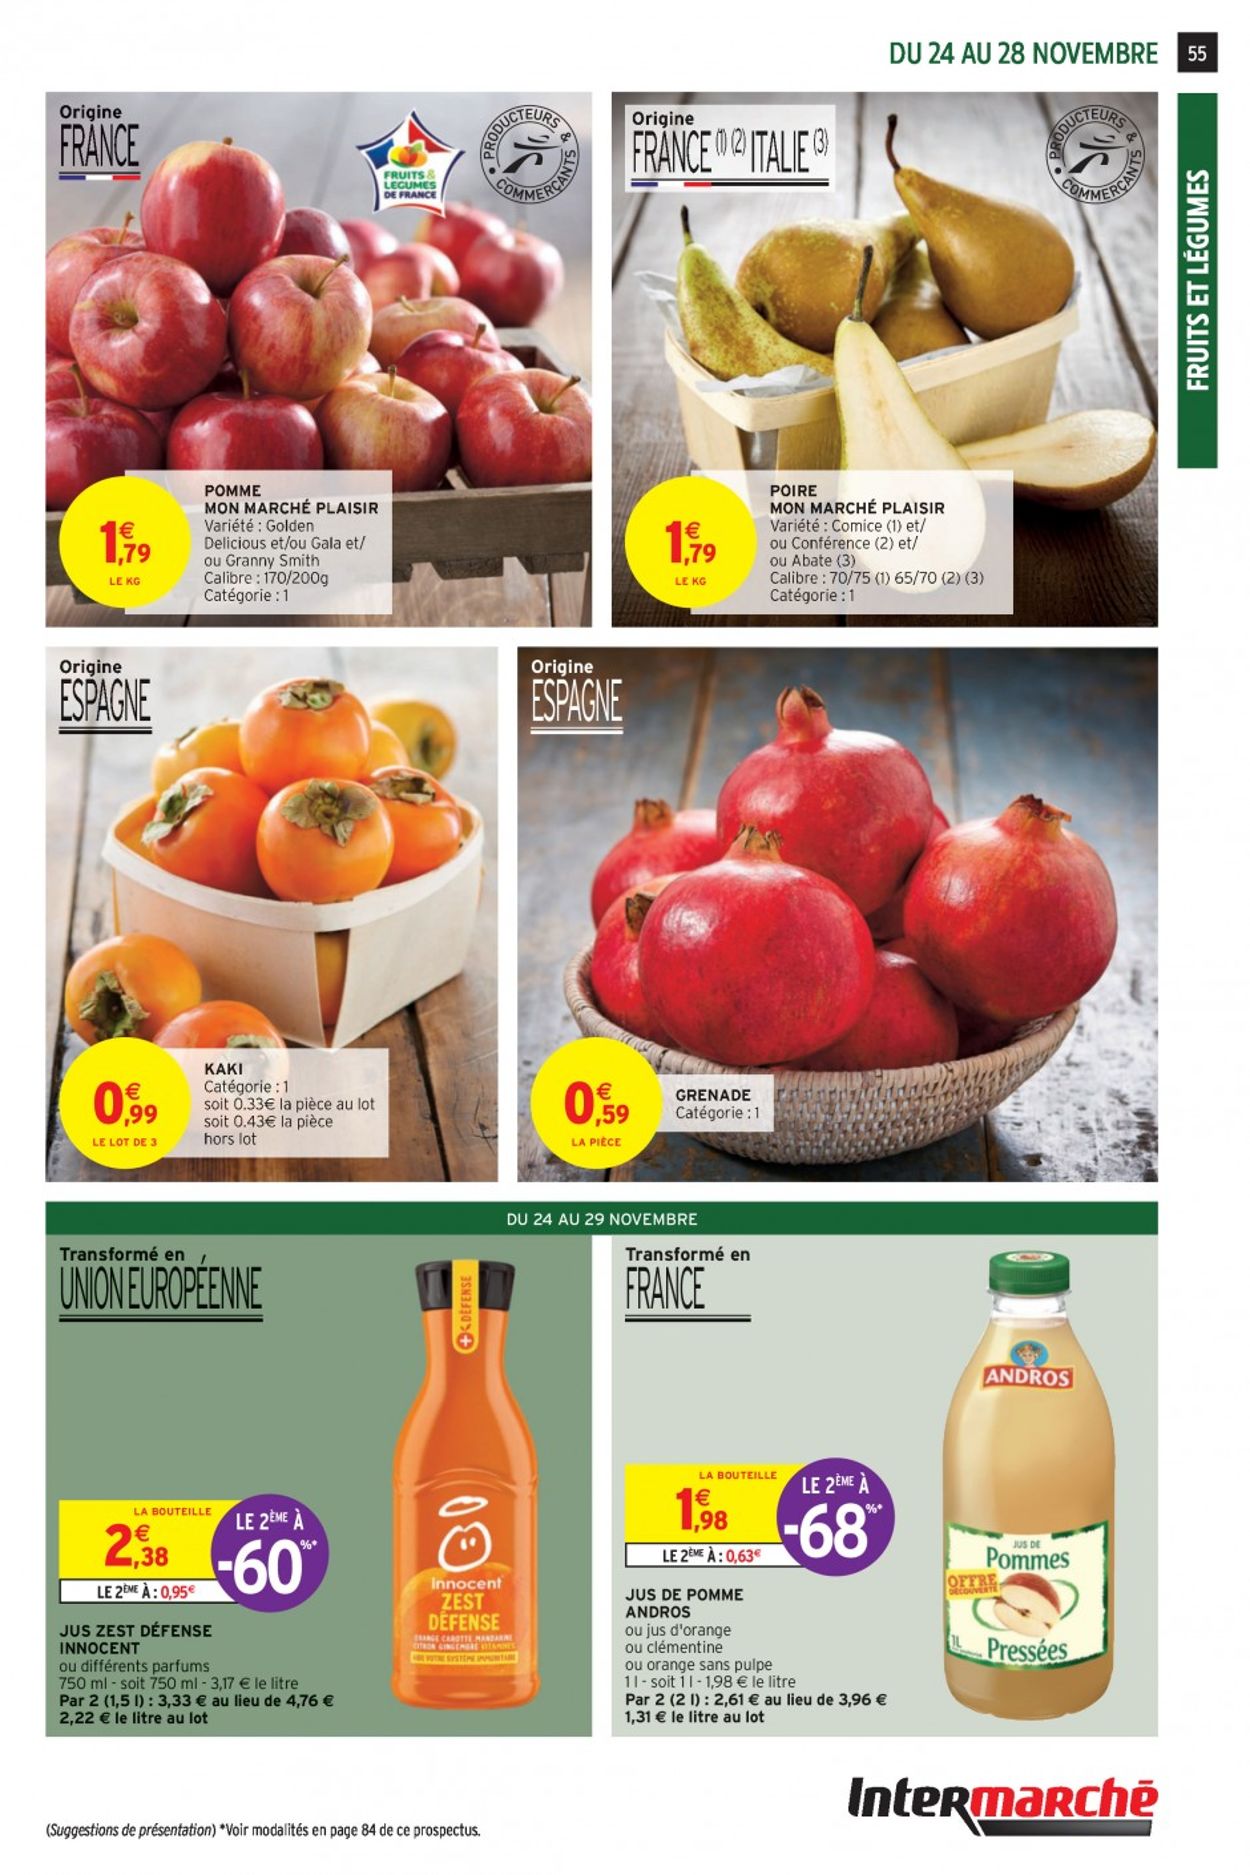 Intermarché Black Friday 2020 Catalogue - 24.11-29.11.2020 (Page 55)